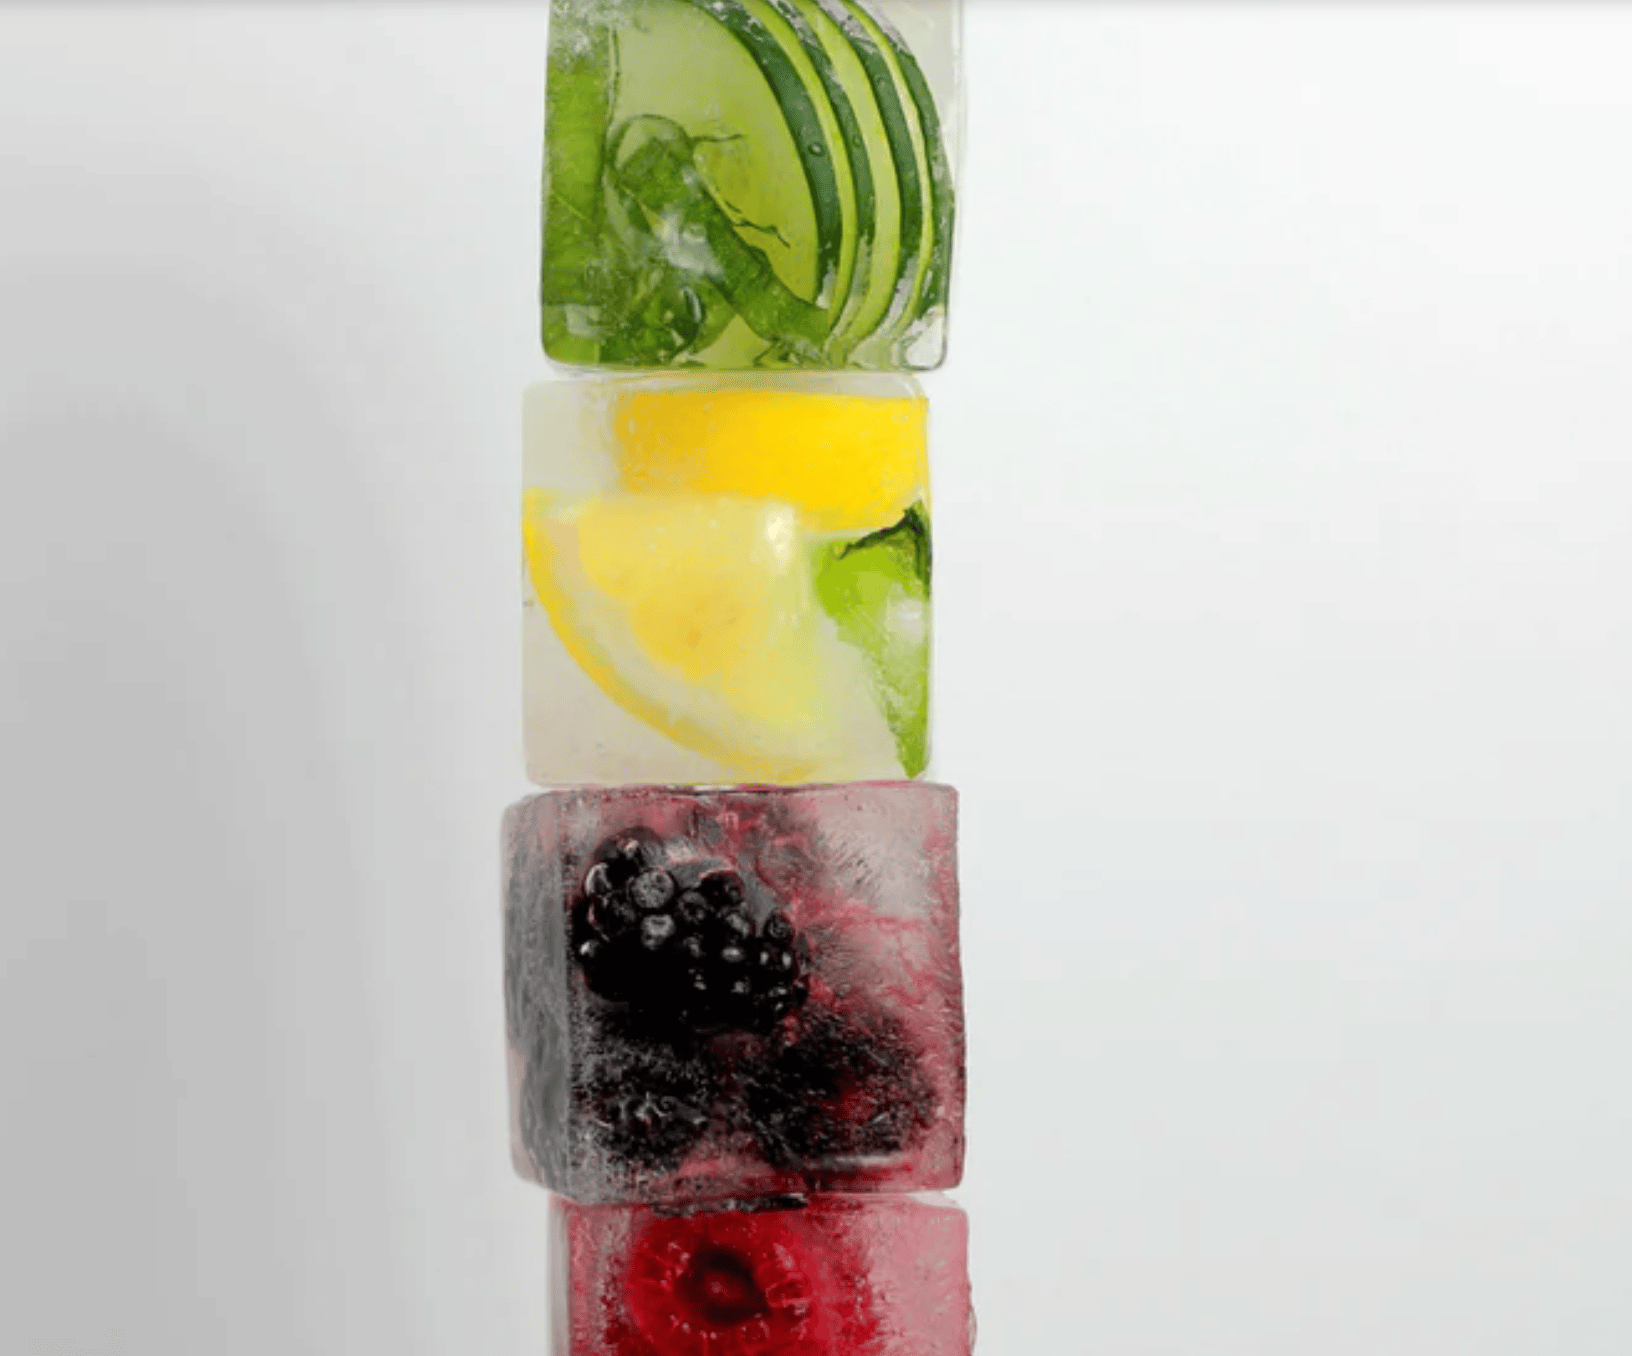 Level Up Your Summer Hydration with These Ice Recipes